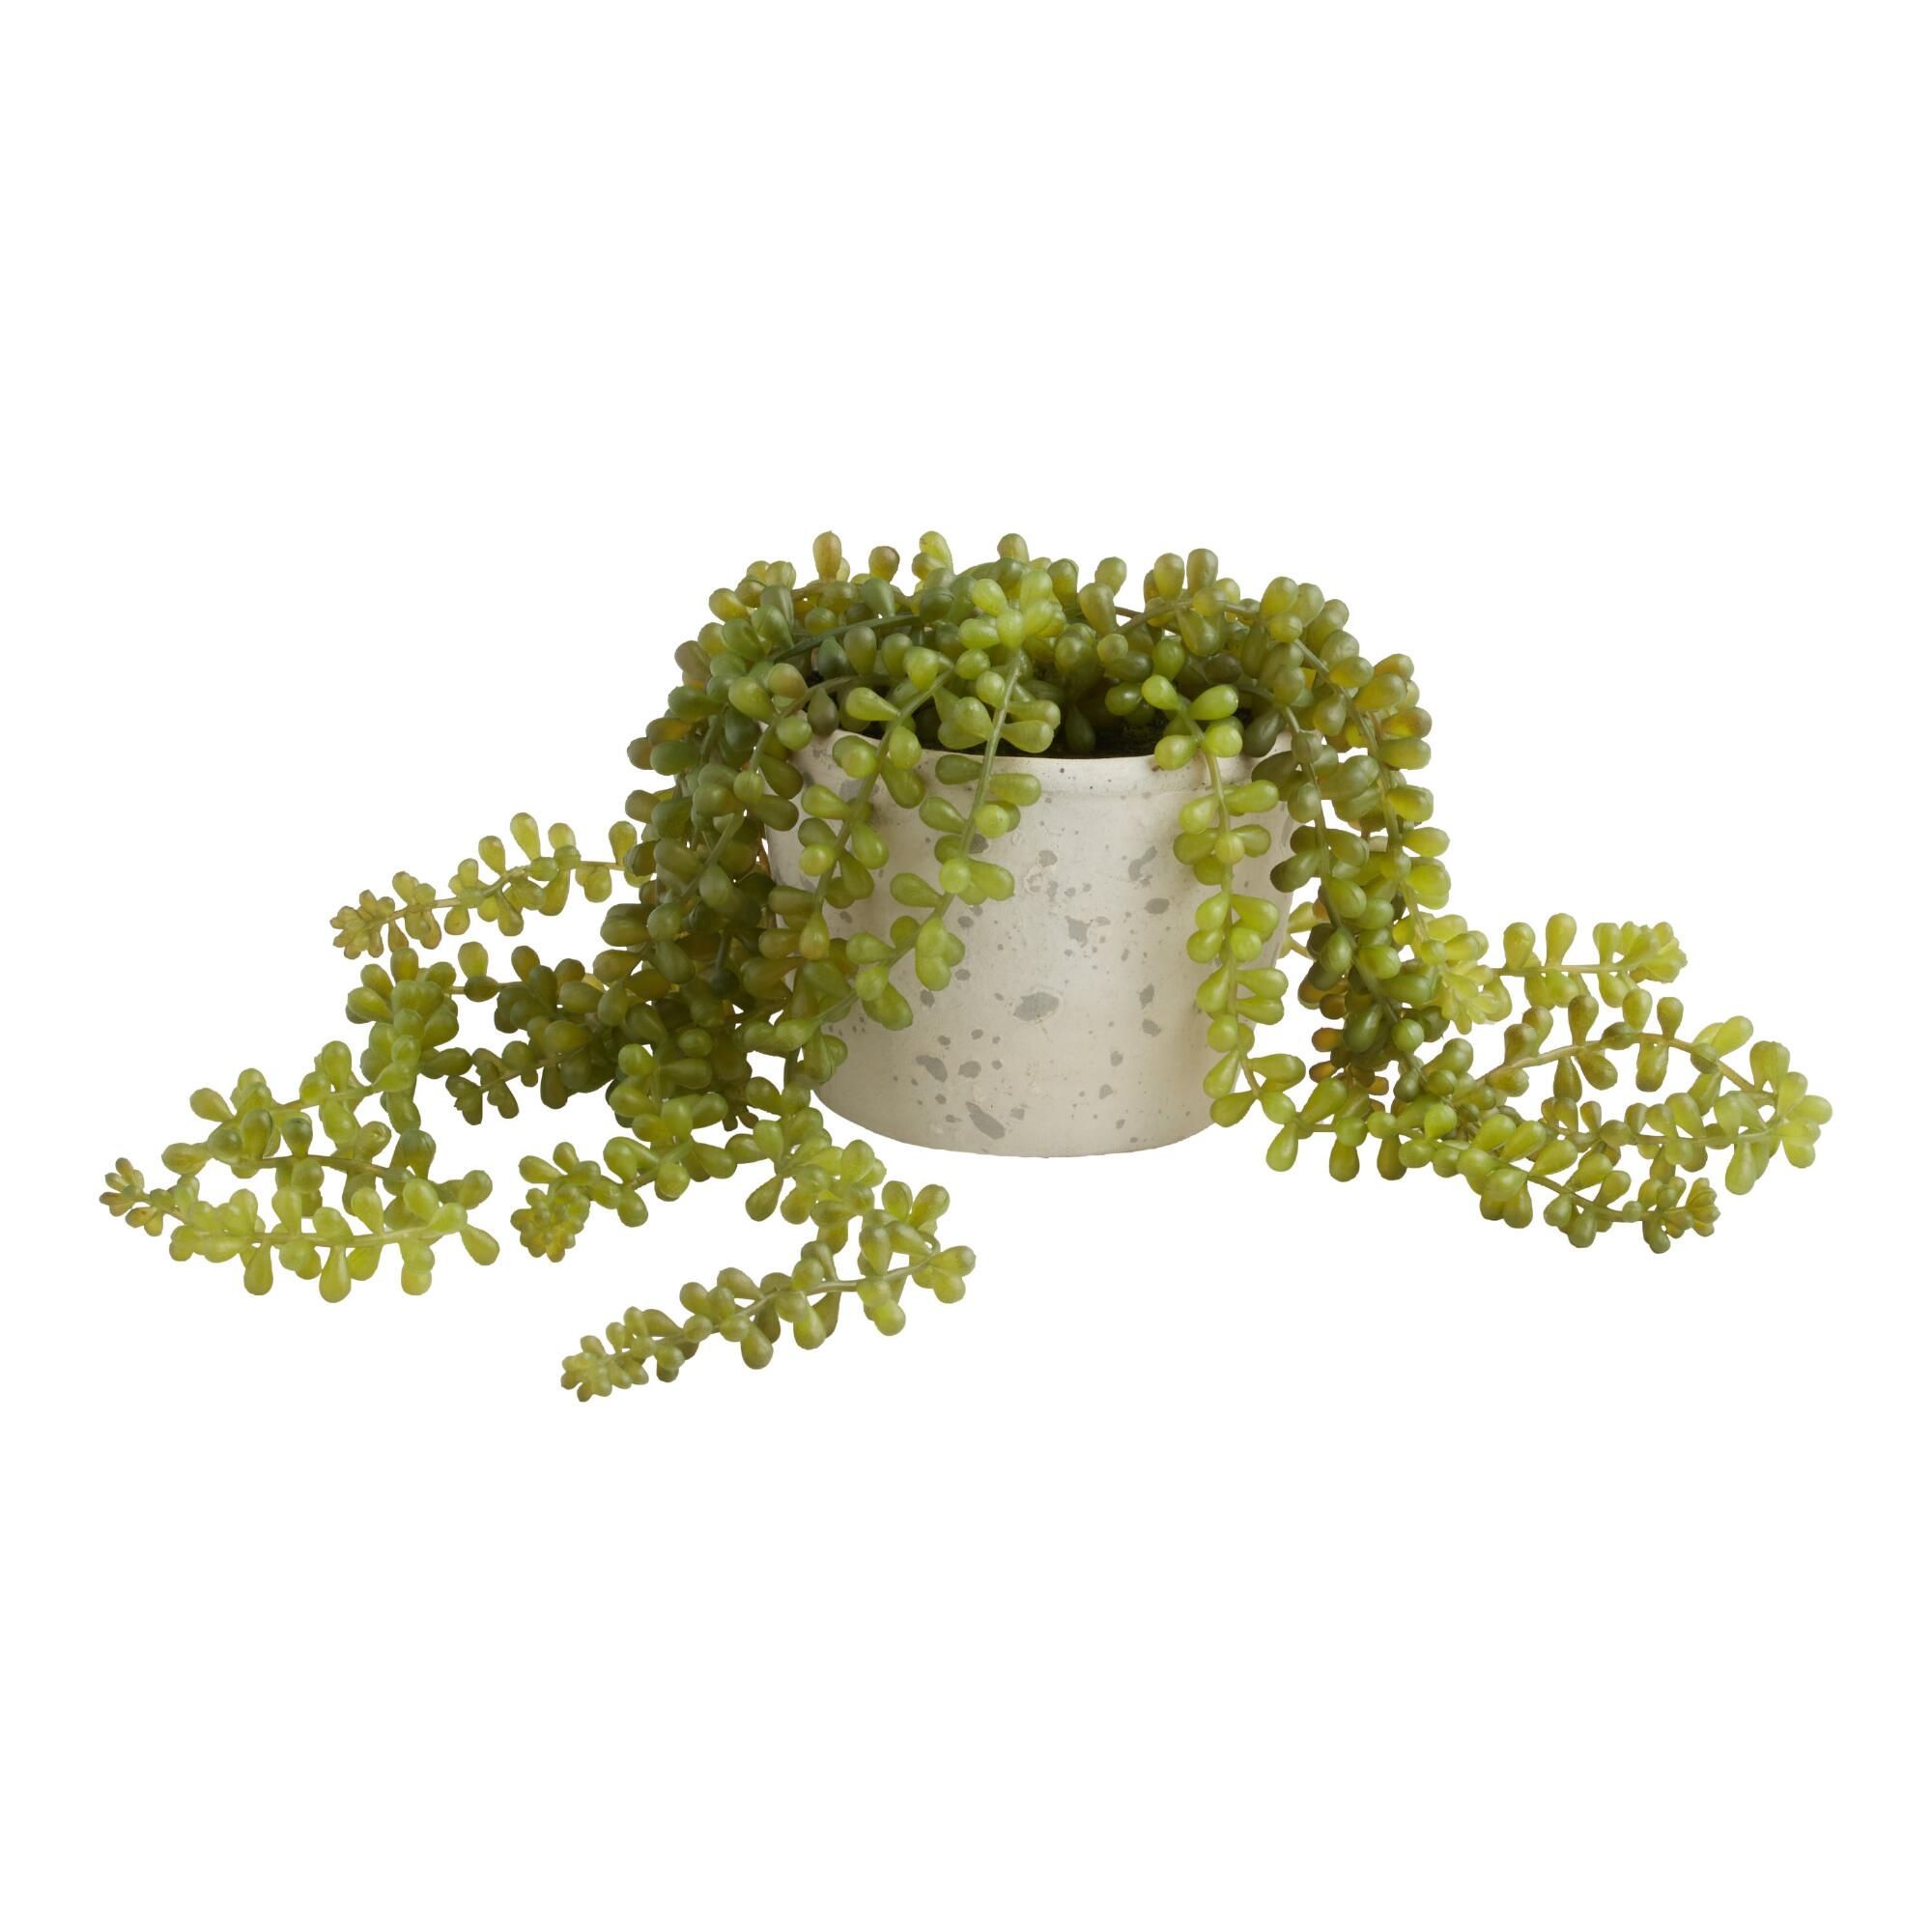 Faux String of Pearls Plant in Textured Pot by World Market | World Market